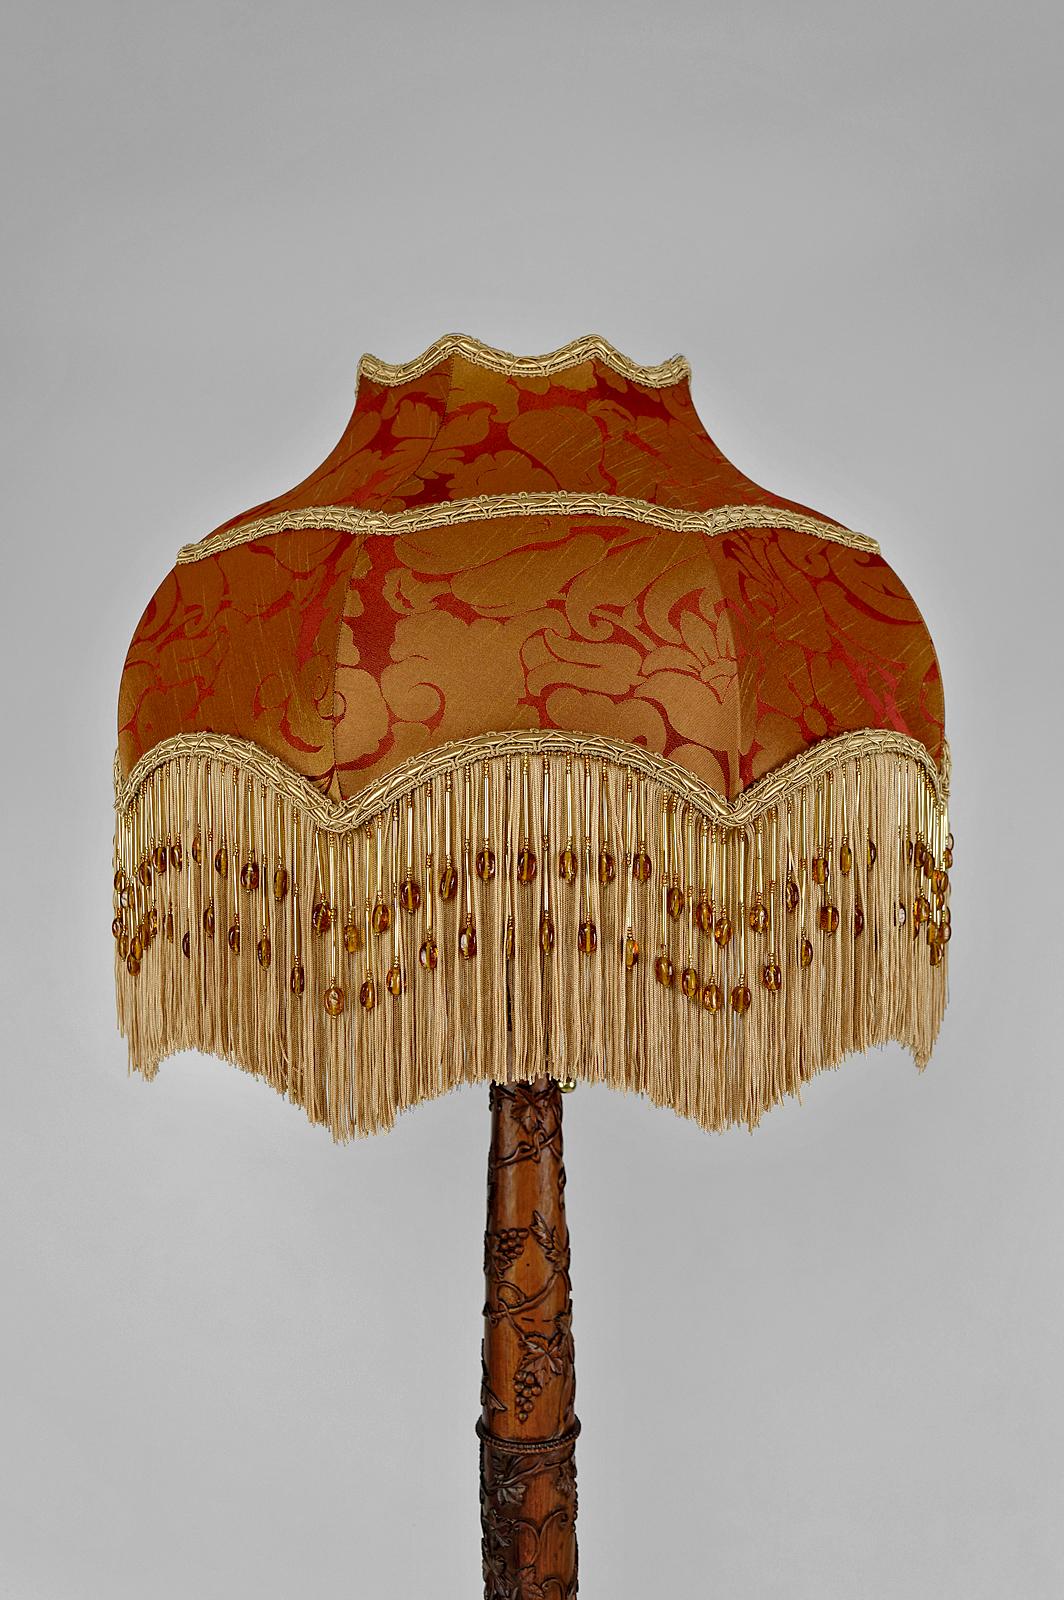 Embroidered Antique Asian carved wooden floor lamp, Indochina or China, circa 1900